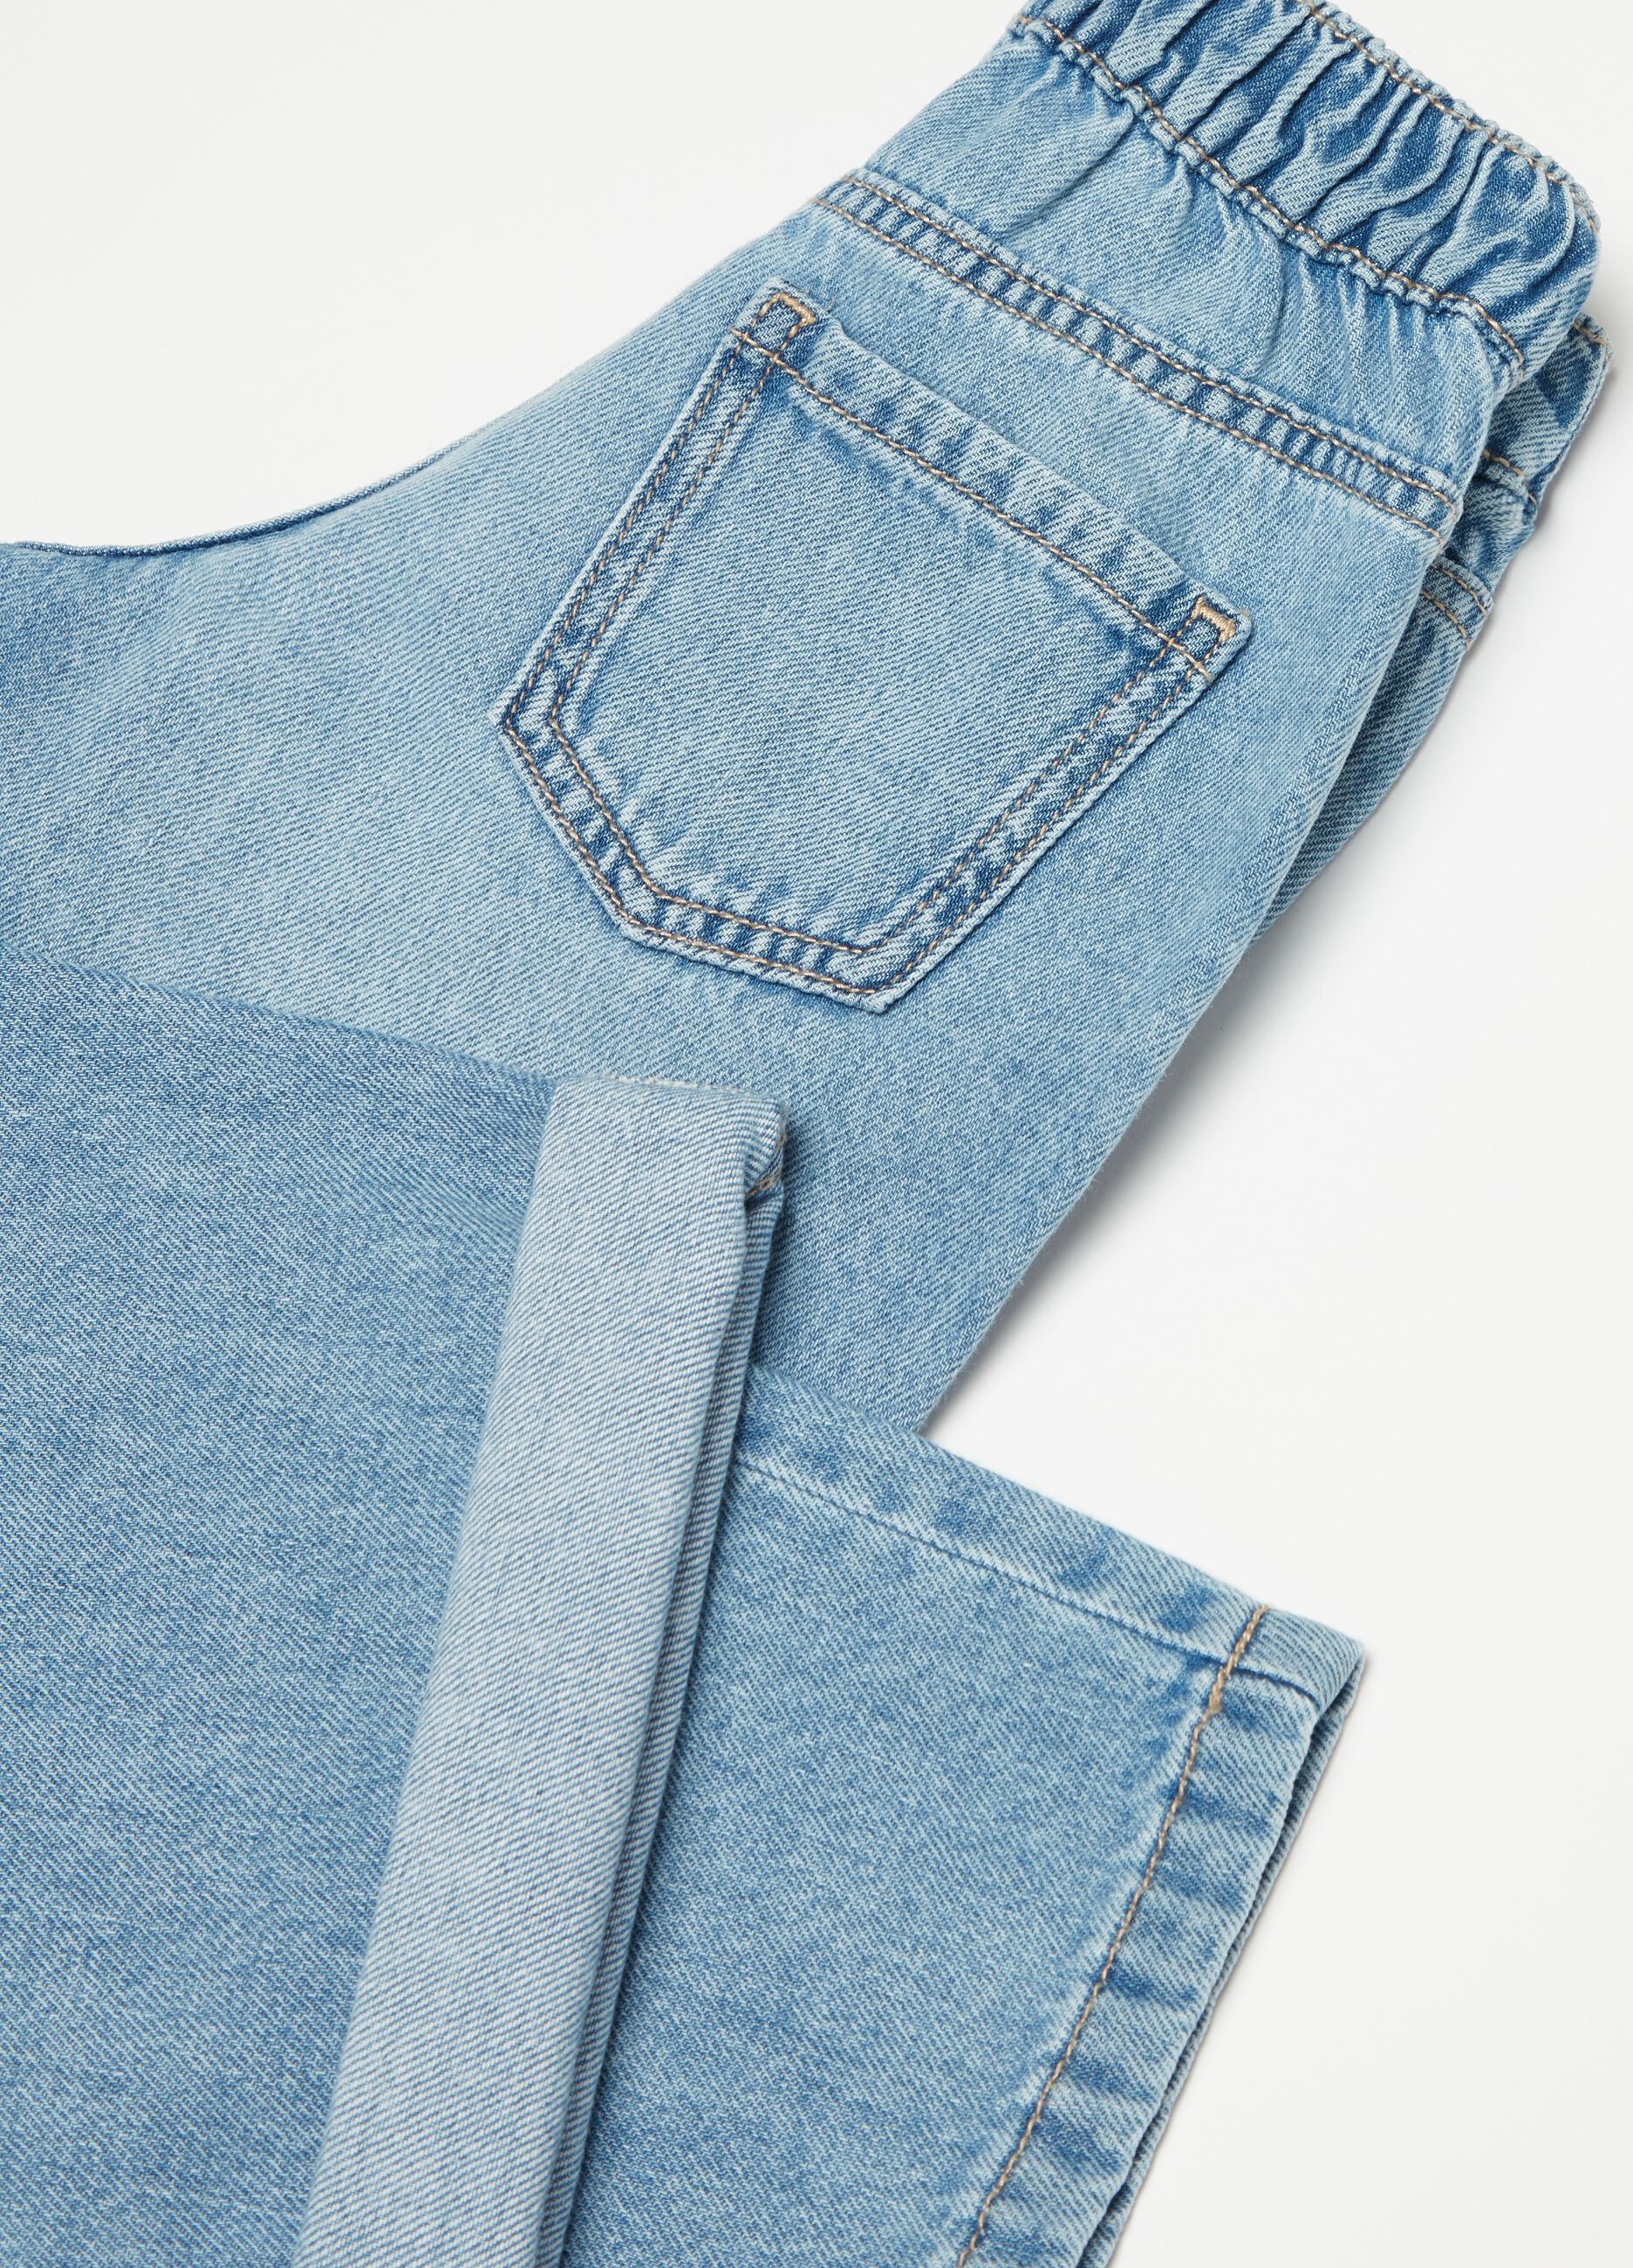 Cropped jeans with pockets